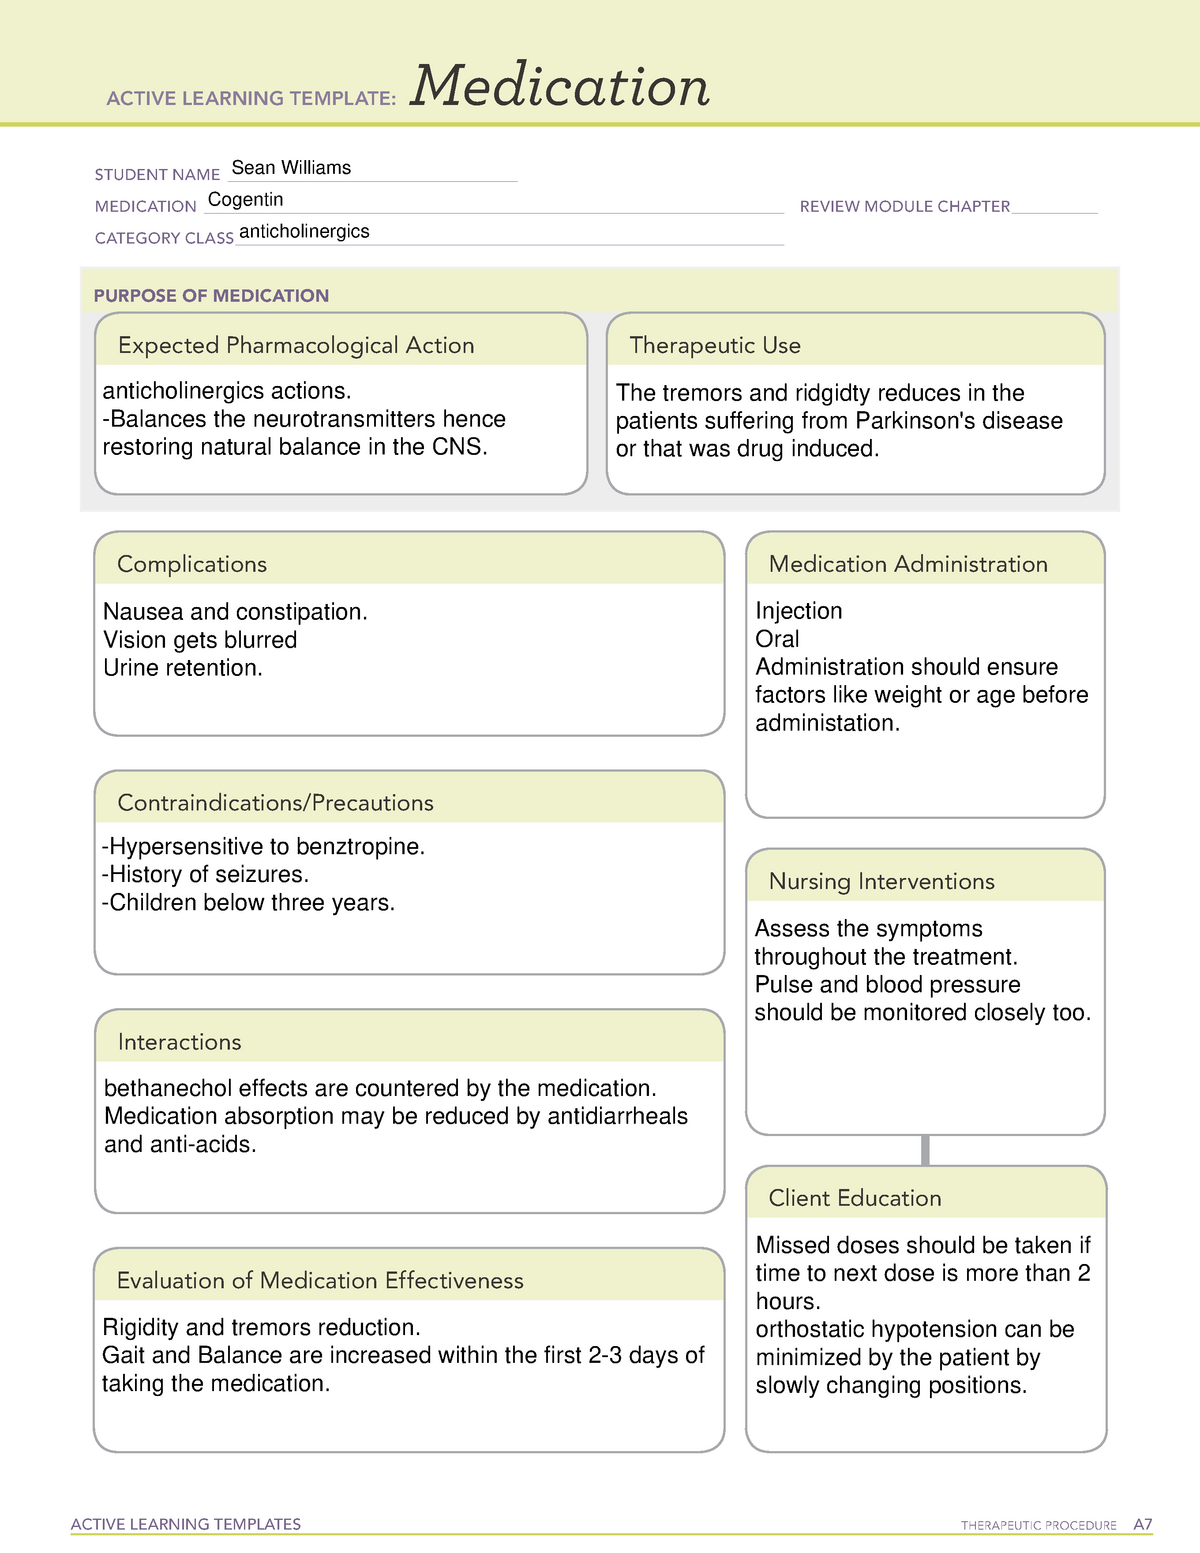 ATI Medication Template Cogentin ACTIVE LEARNING TEMPLATES